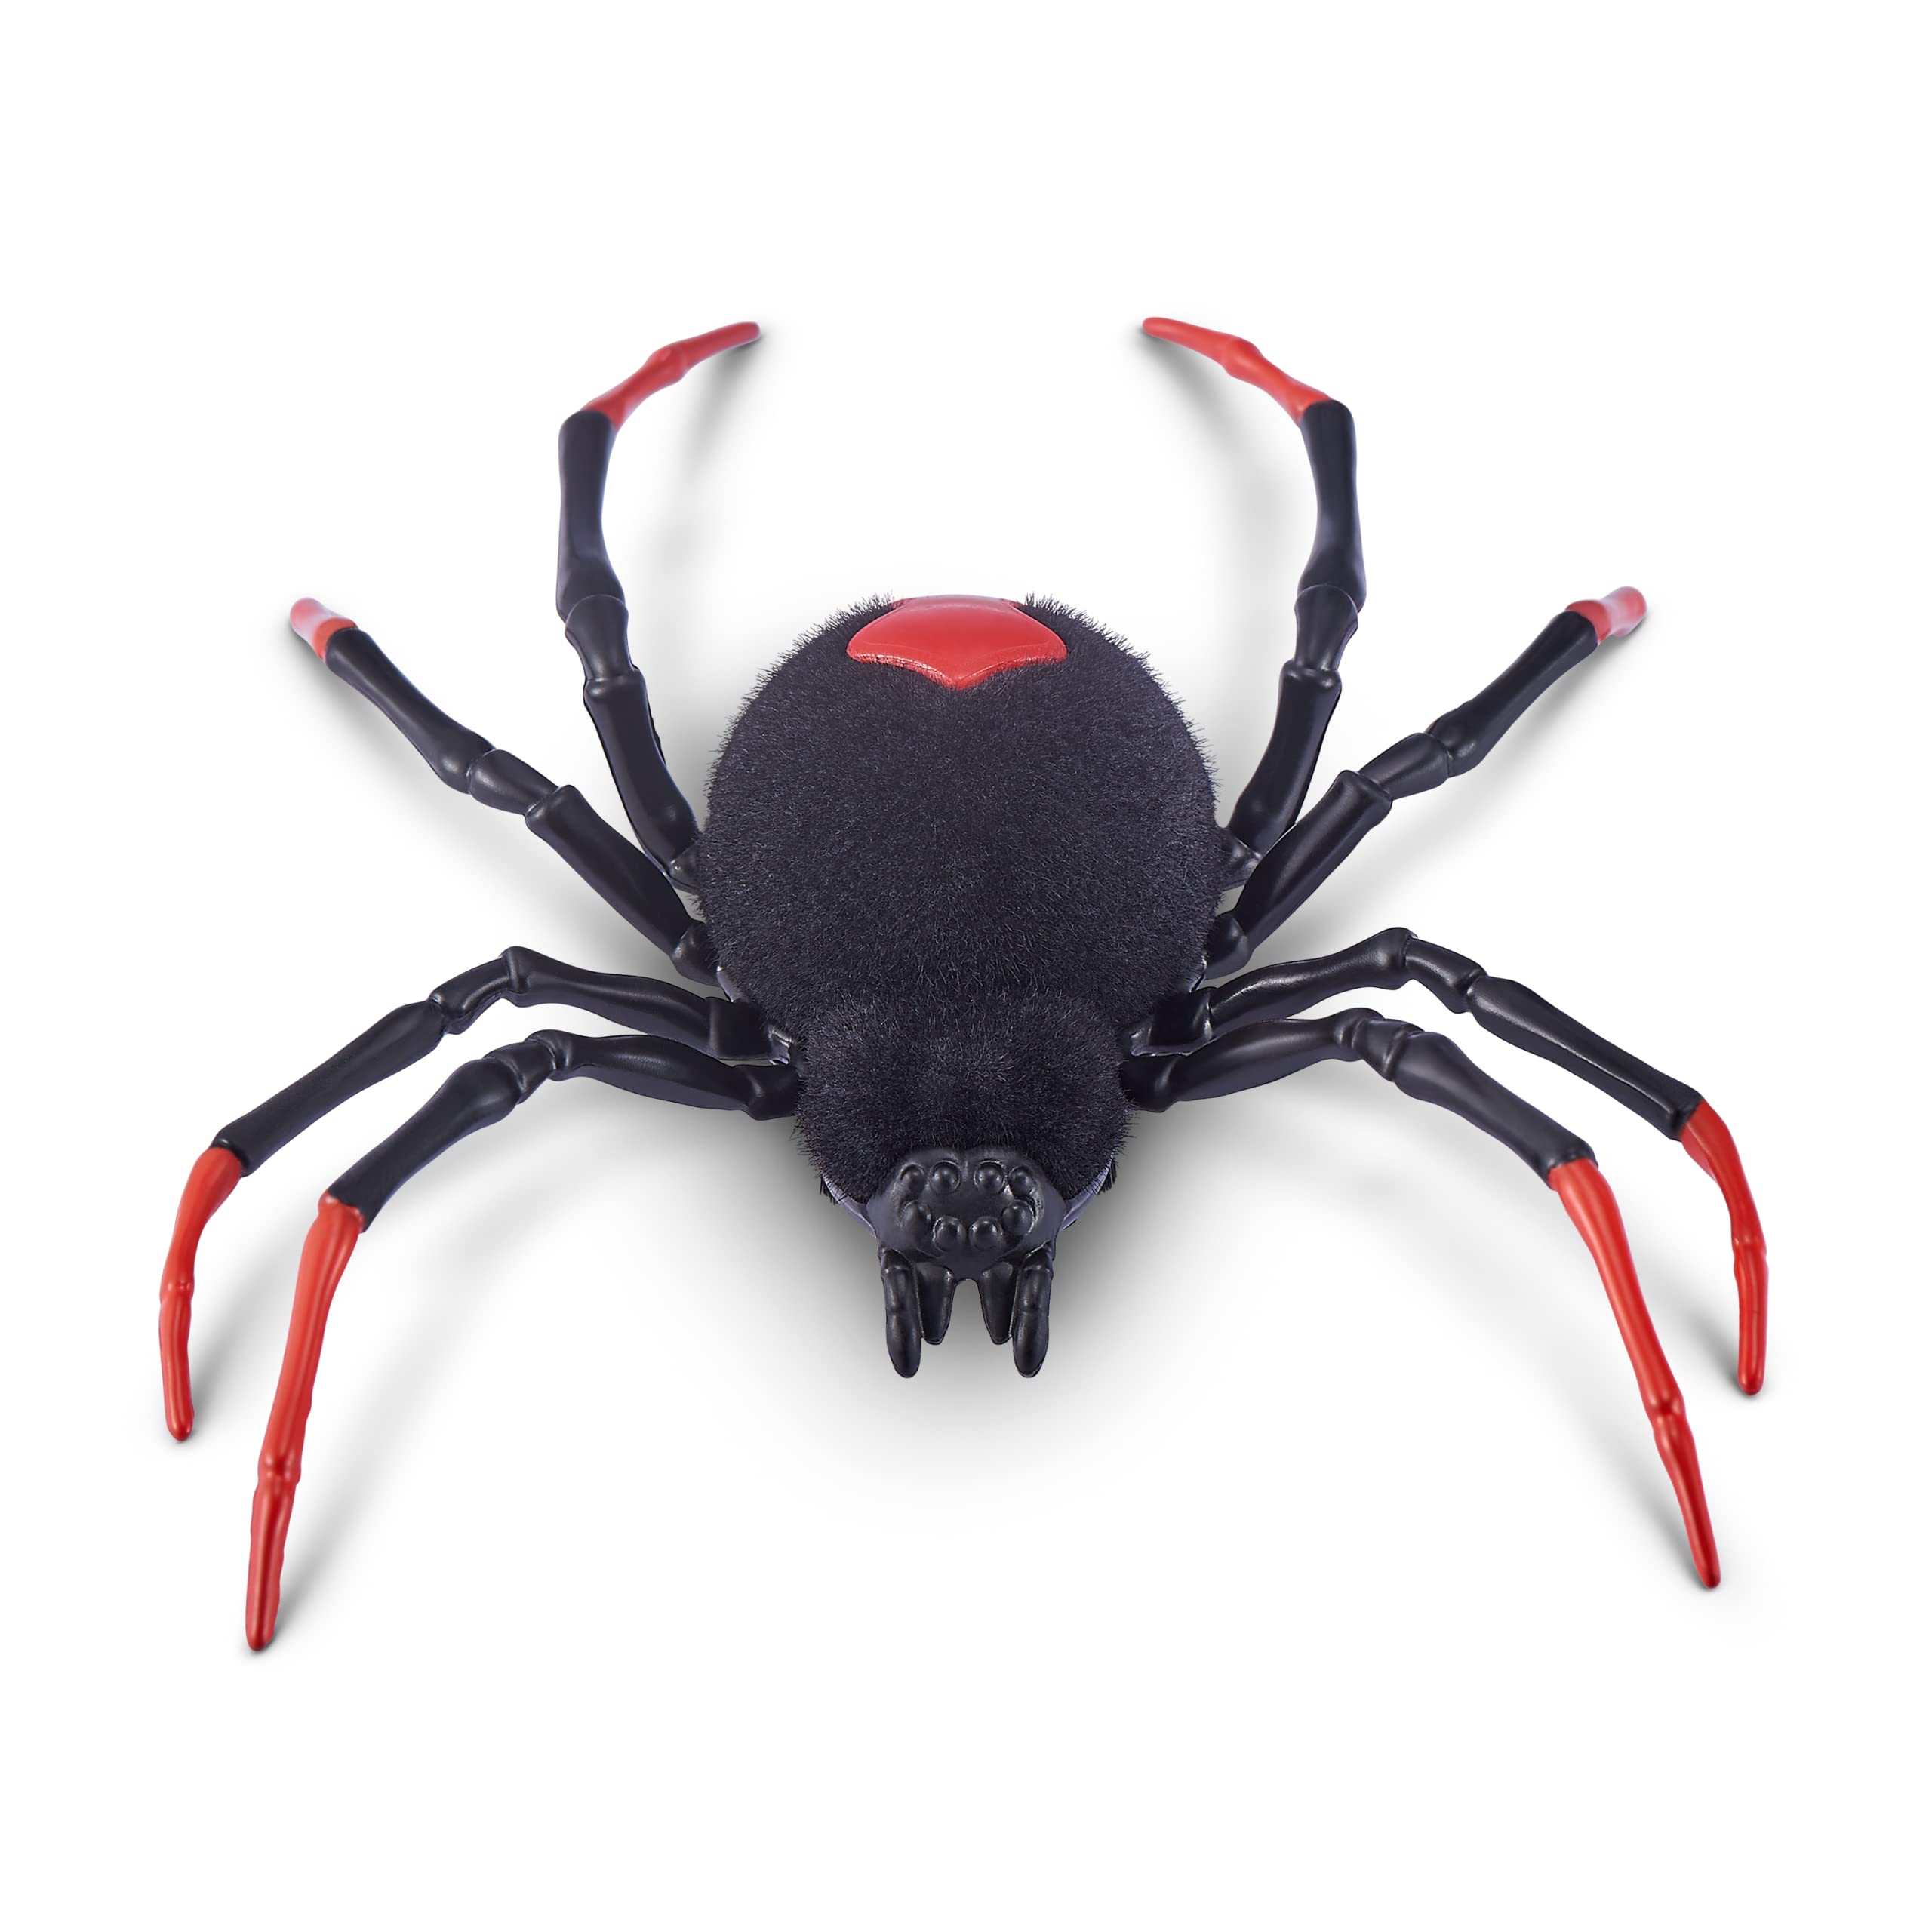 Robo Alive Crawling Spider Glow in The Dark (2 Pack) by ZURU Battery-Powered Robotic Interactive Electronic Spider Toy That Moves and Crawls, Prankst Toys for Boys, Kids, Teens